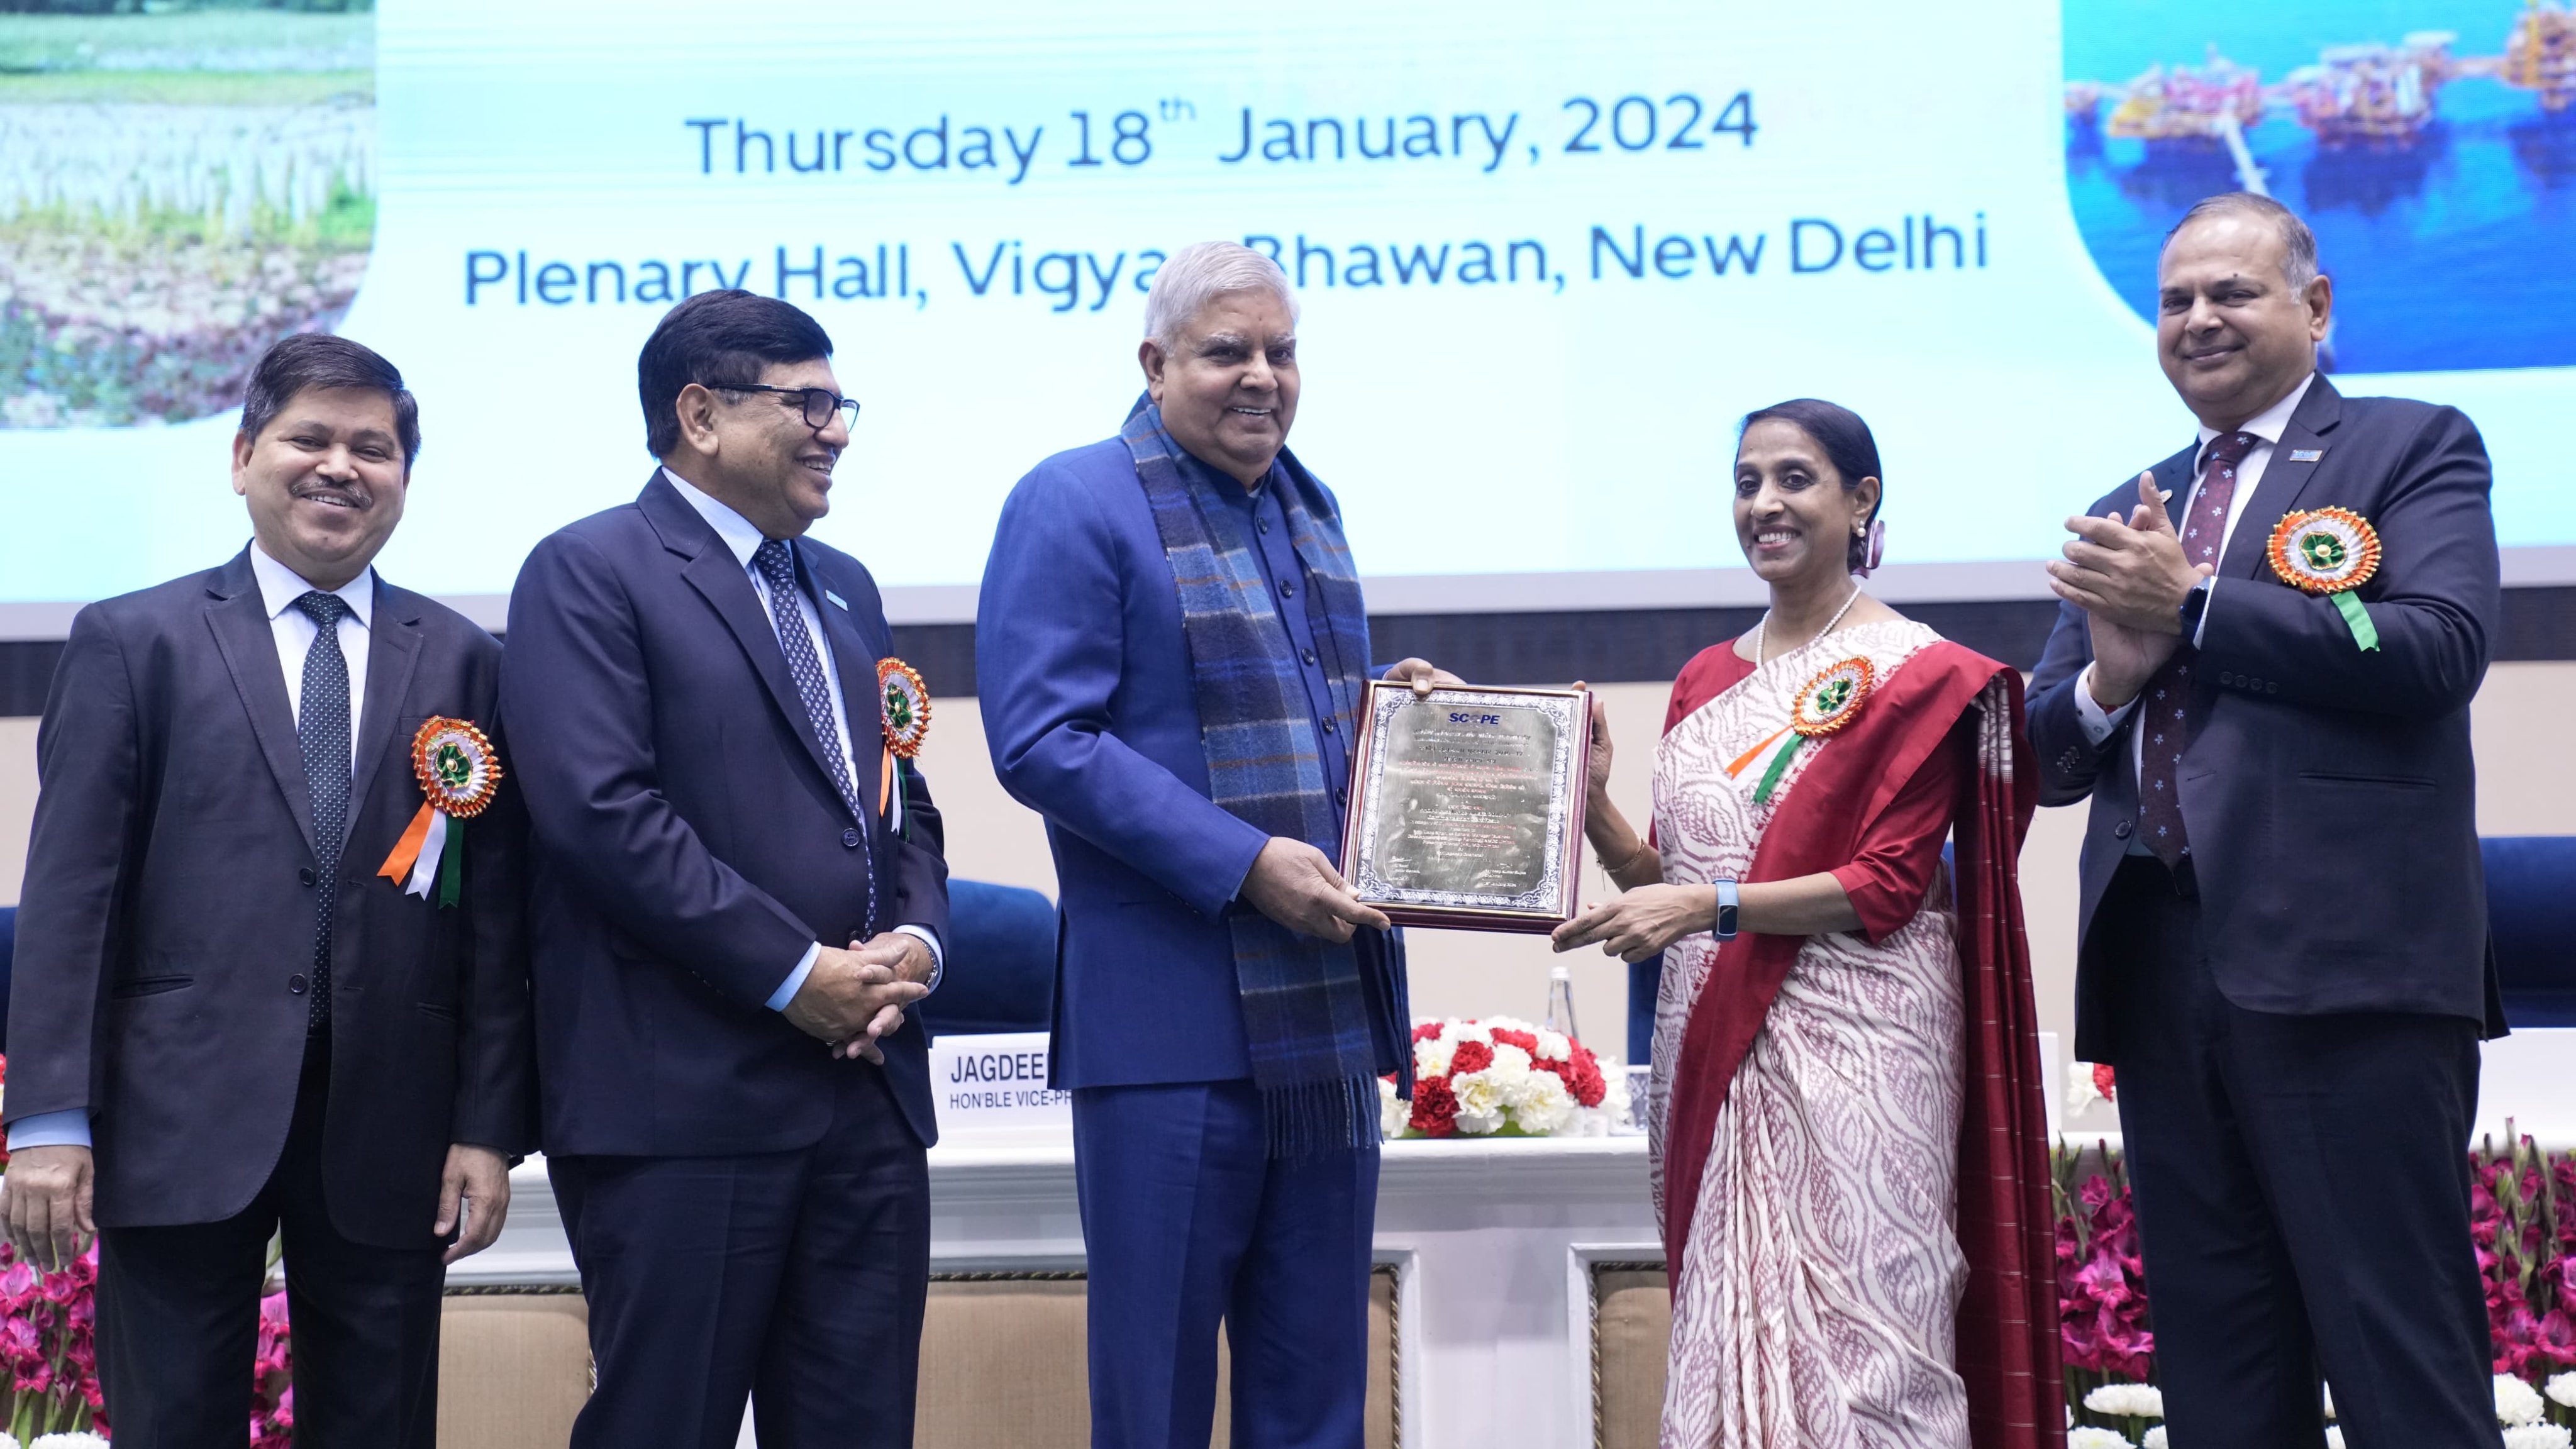 The Vice-President, Shri Jagdeep Dhankhar presenting the SCOPE Awards, recognising the contribution of Public Sector Enterprises, in New Delhi on January 18, 2024.